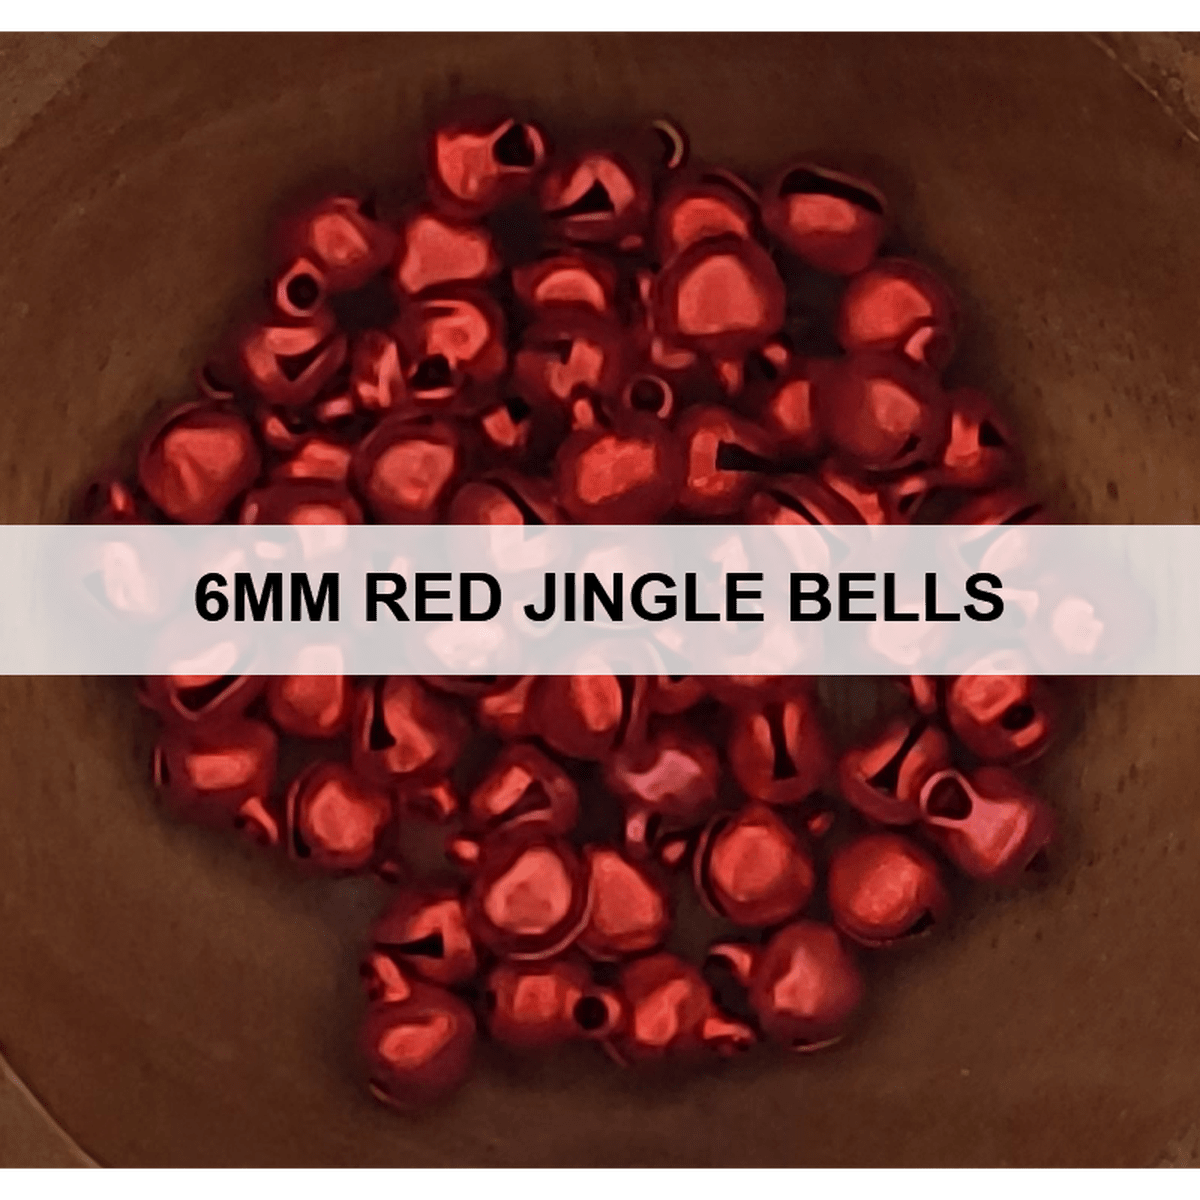 6mm Red Jingle Bells - Kat Scrappiness